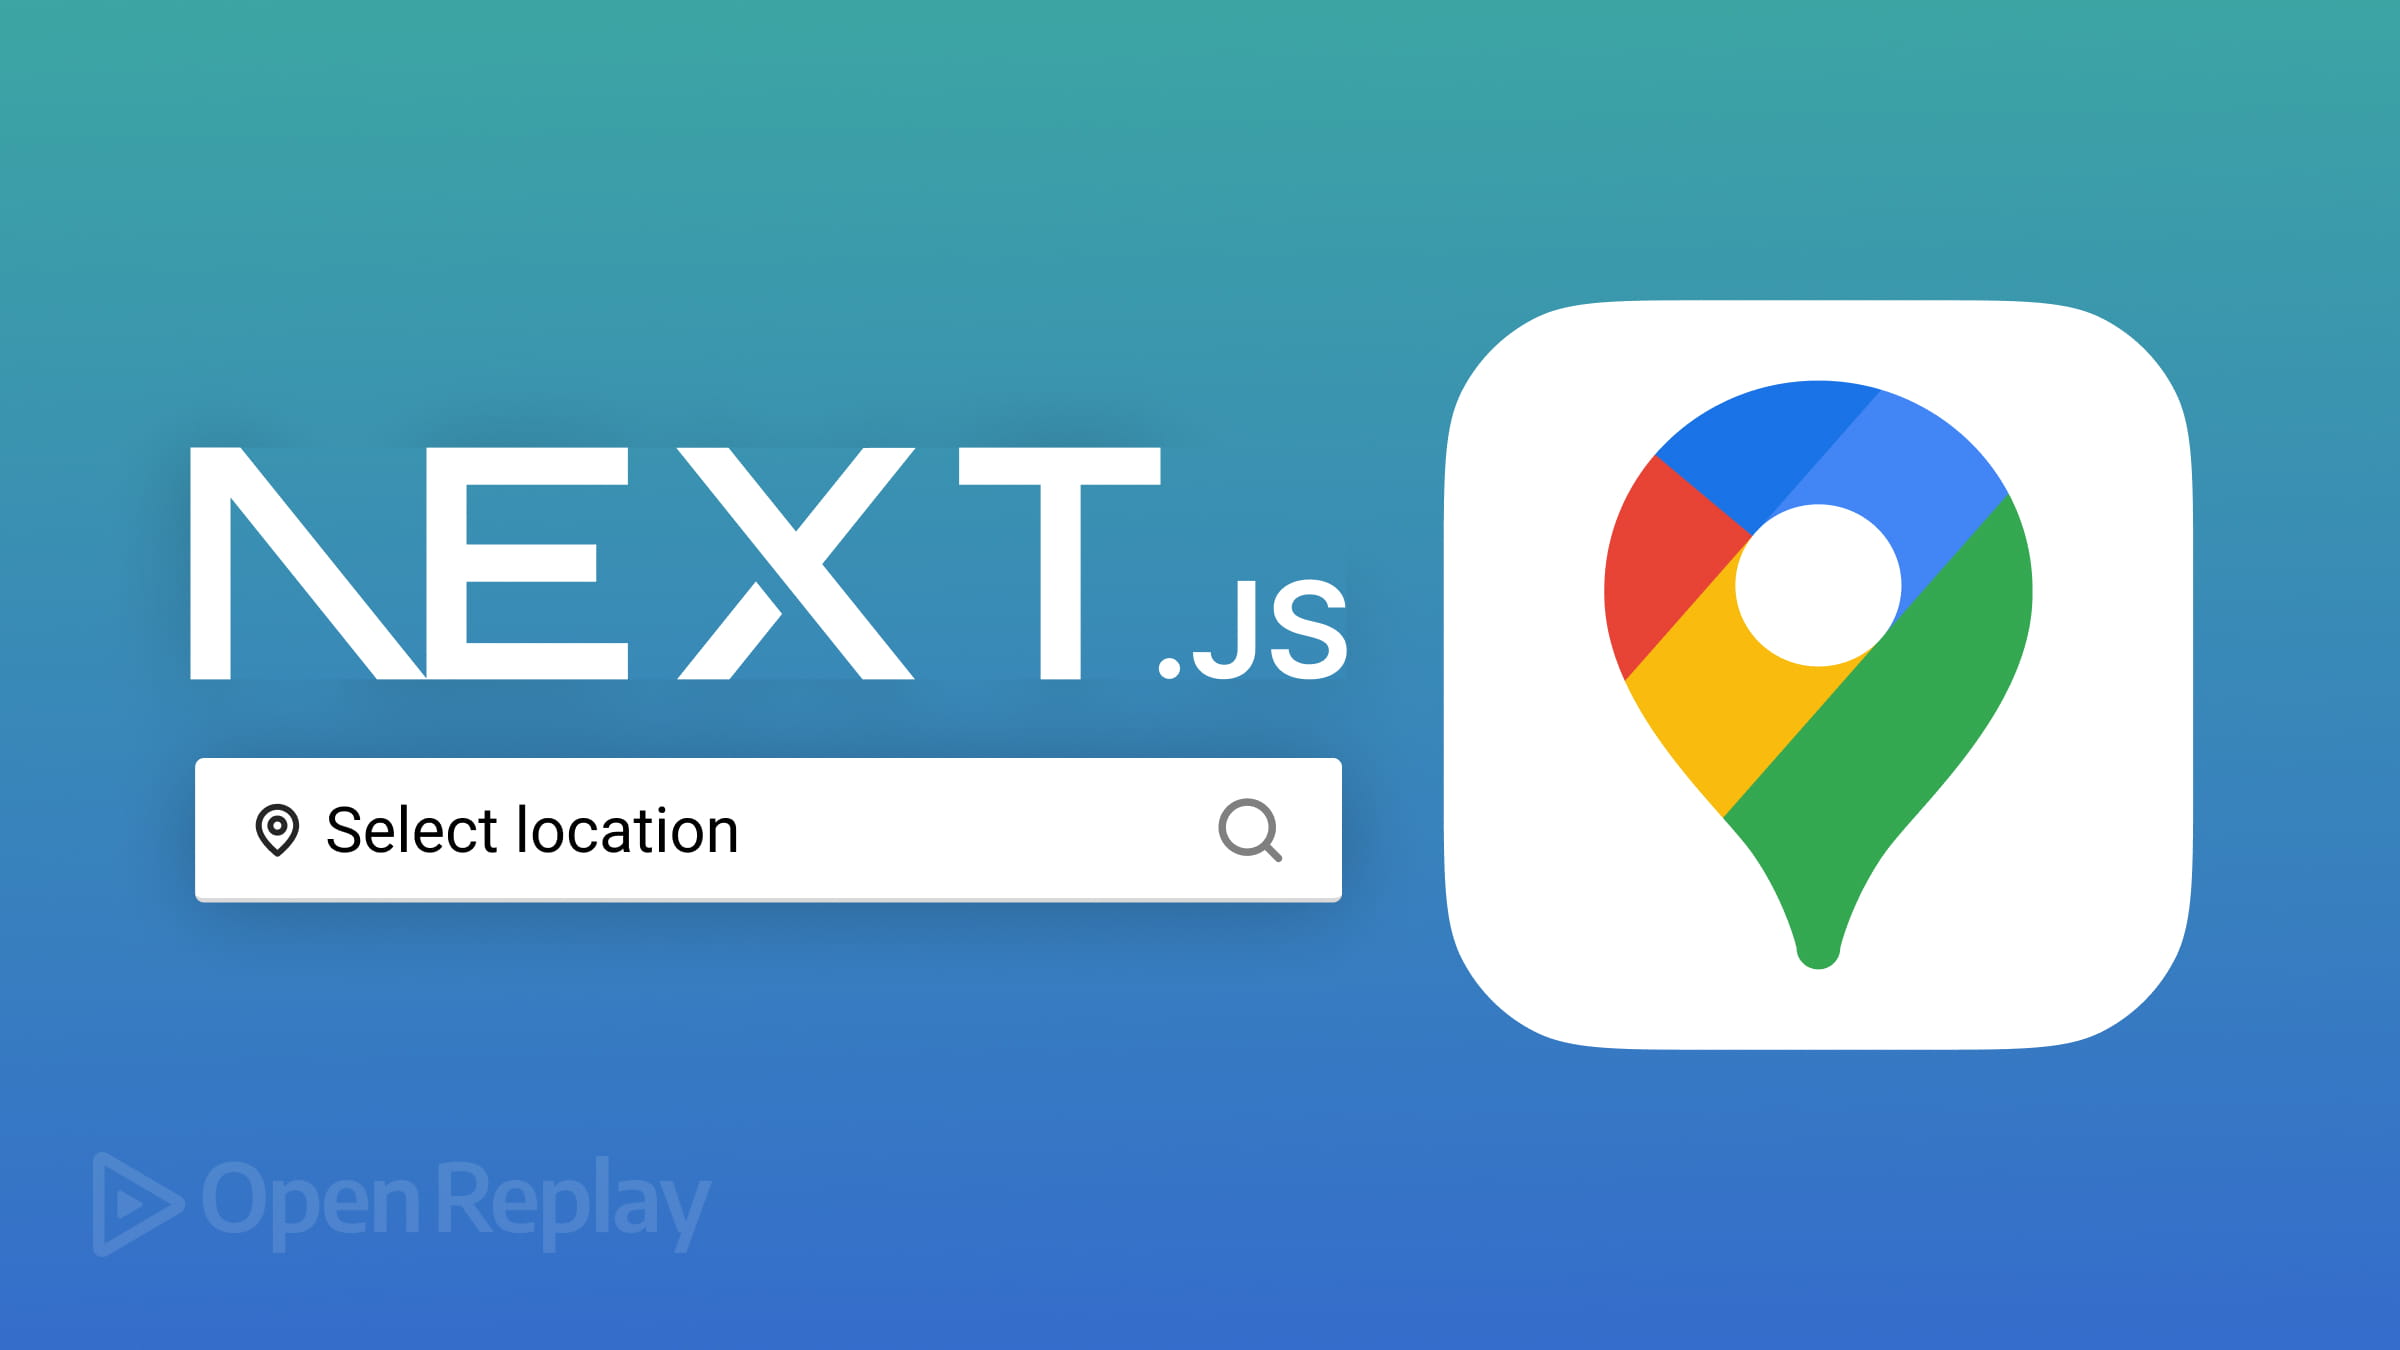 Implementing Global Location Search for your Next.js App